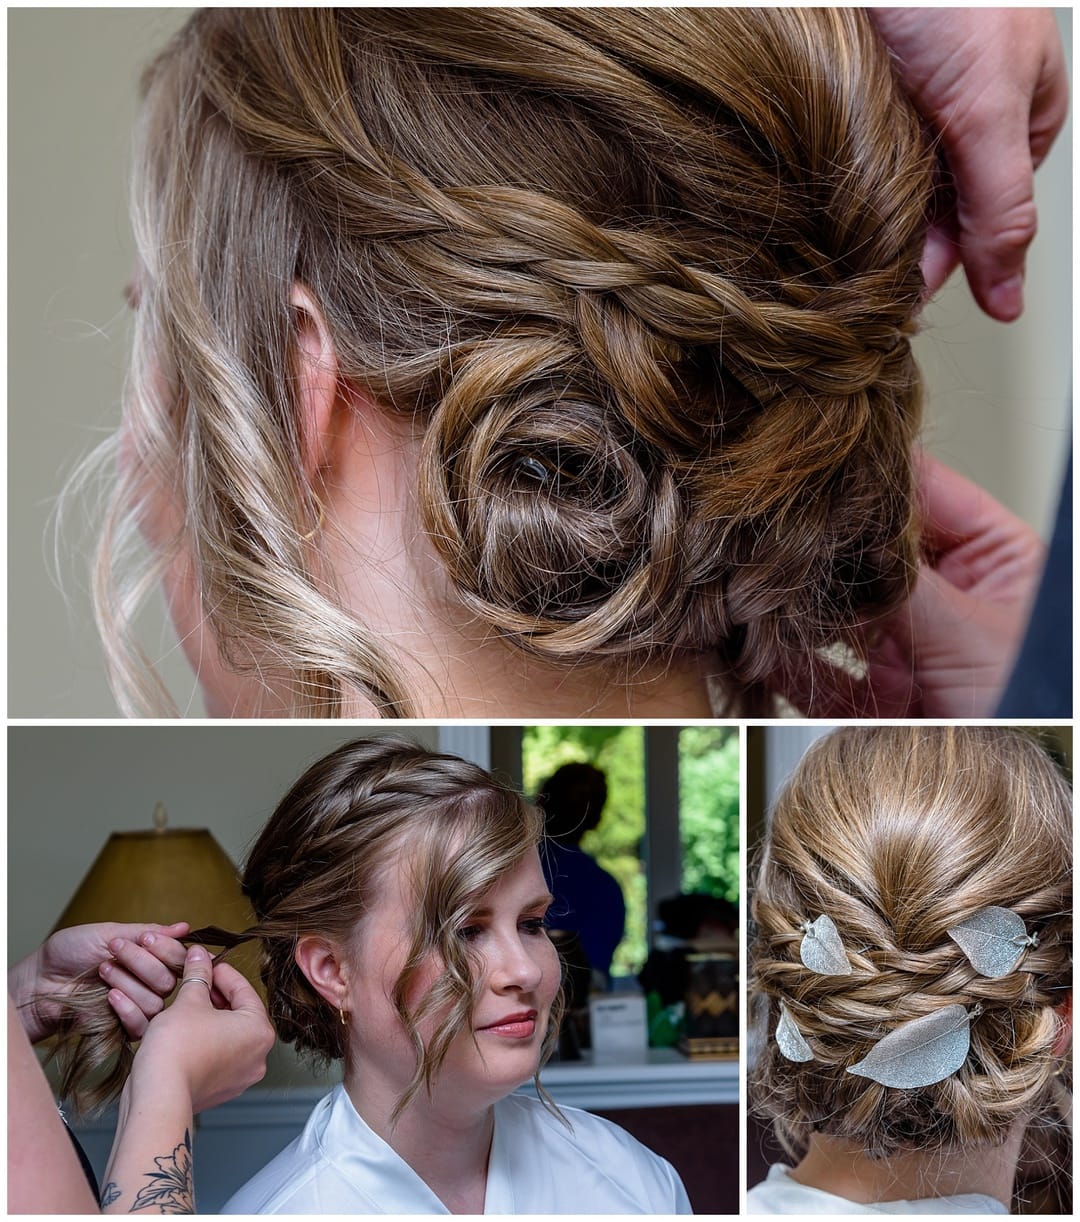 The bride has her bridal hair style created for her wedding day in Halifax, NS.